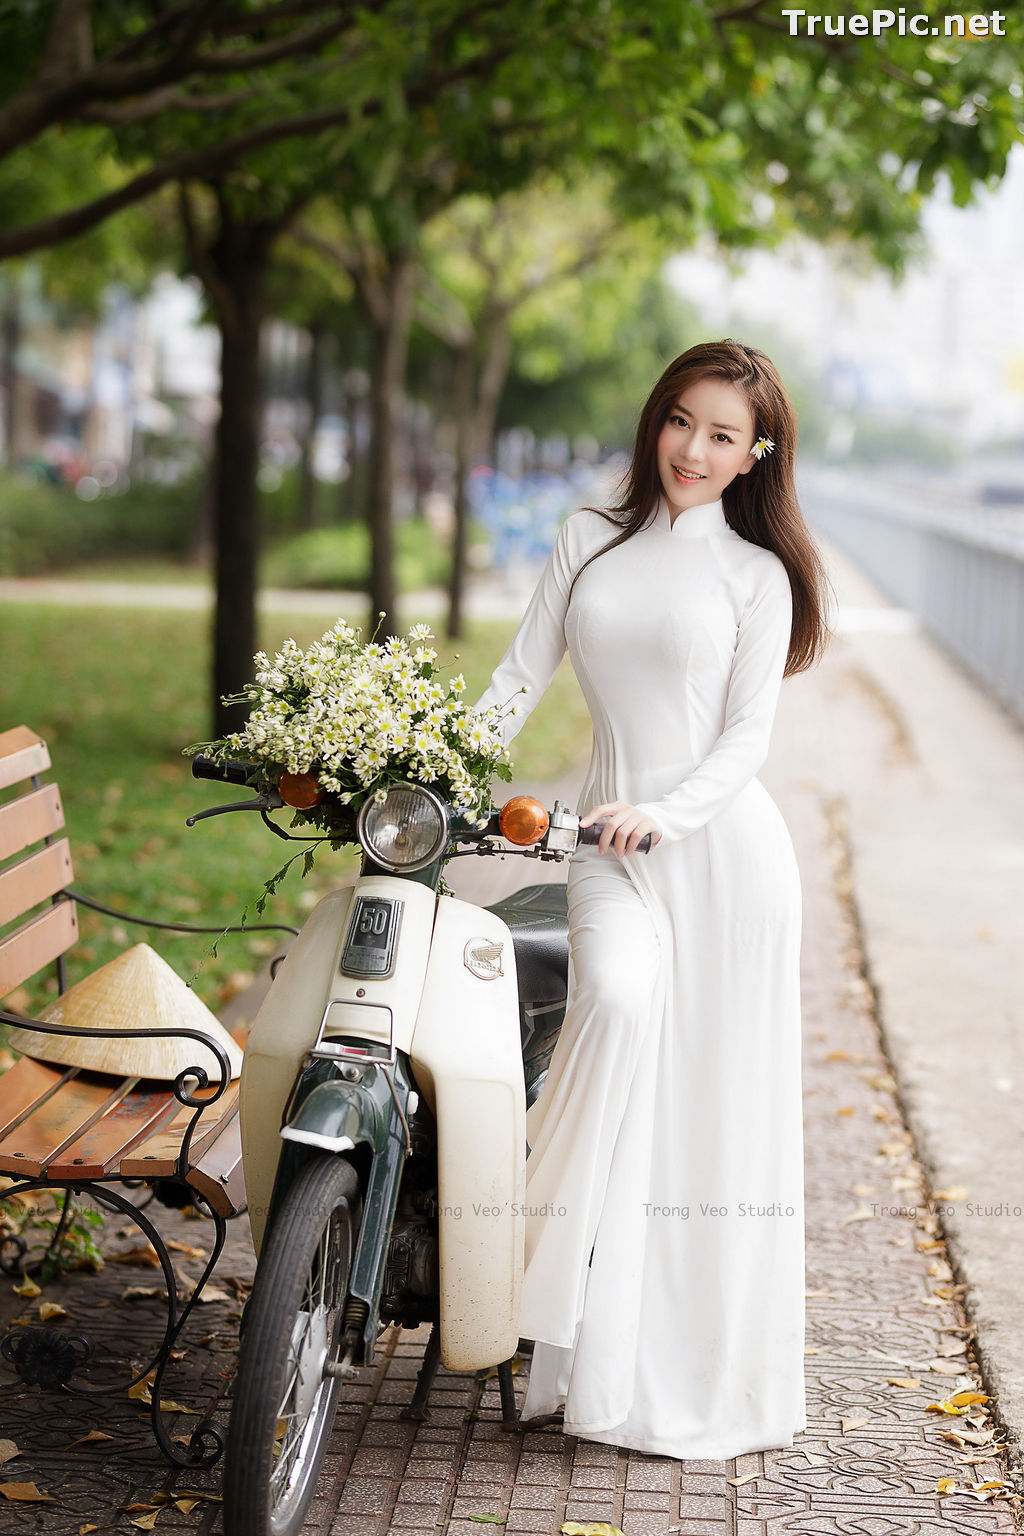 Image The Beauty of Vietnamese Girls with Traditional Dress (Ao Dai) #1 - TruePic.net - Picture-27